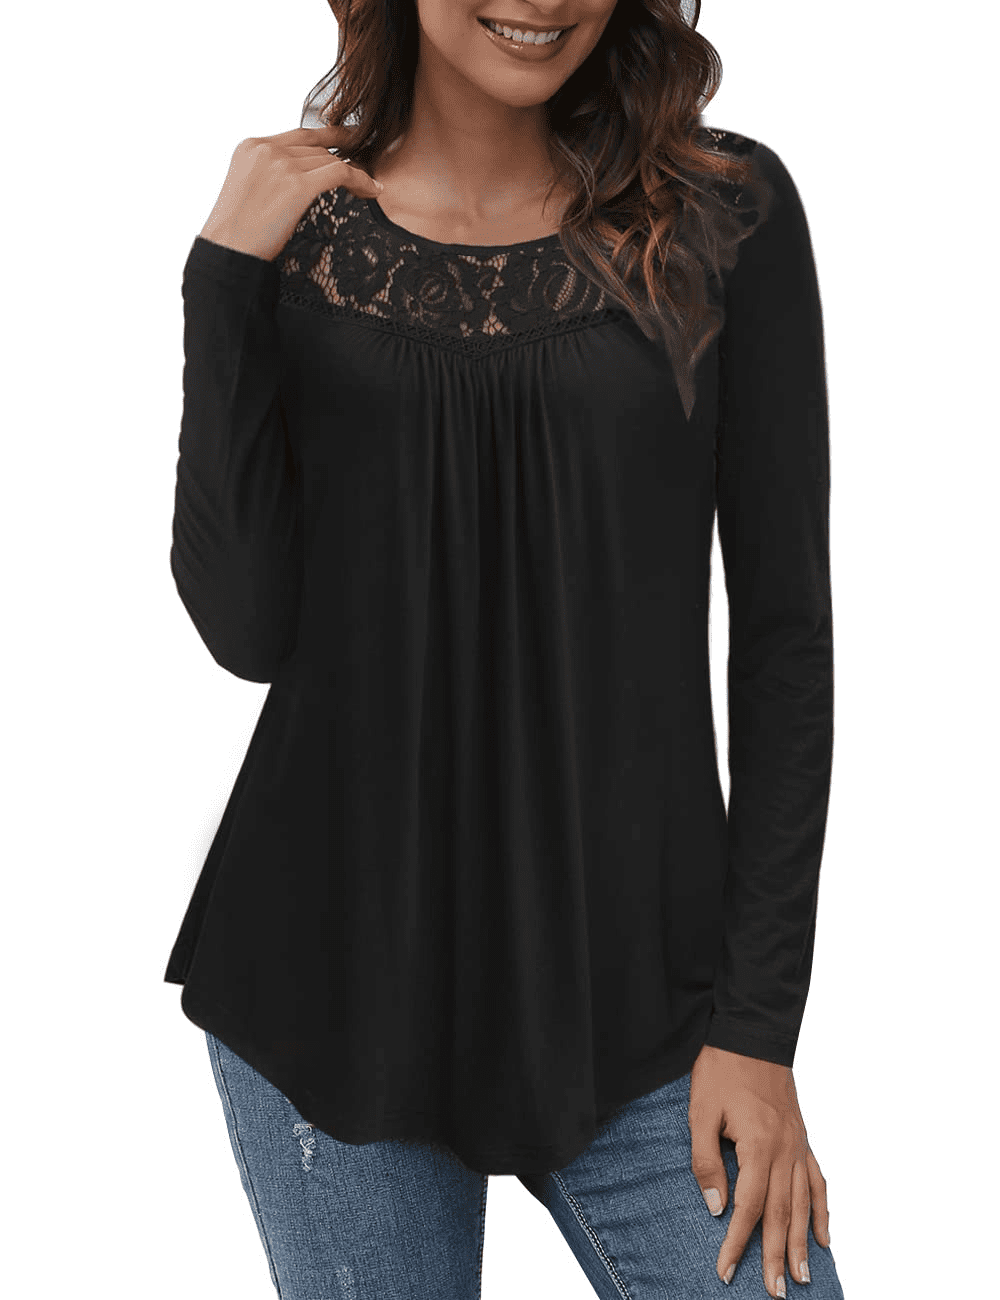 CPOKRTWSO Women's Tops Plus Size Long Sleeve Tunic Blouses Lace Flowy ...